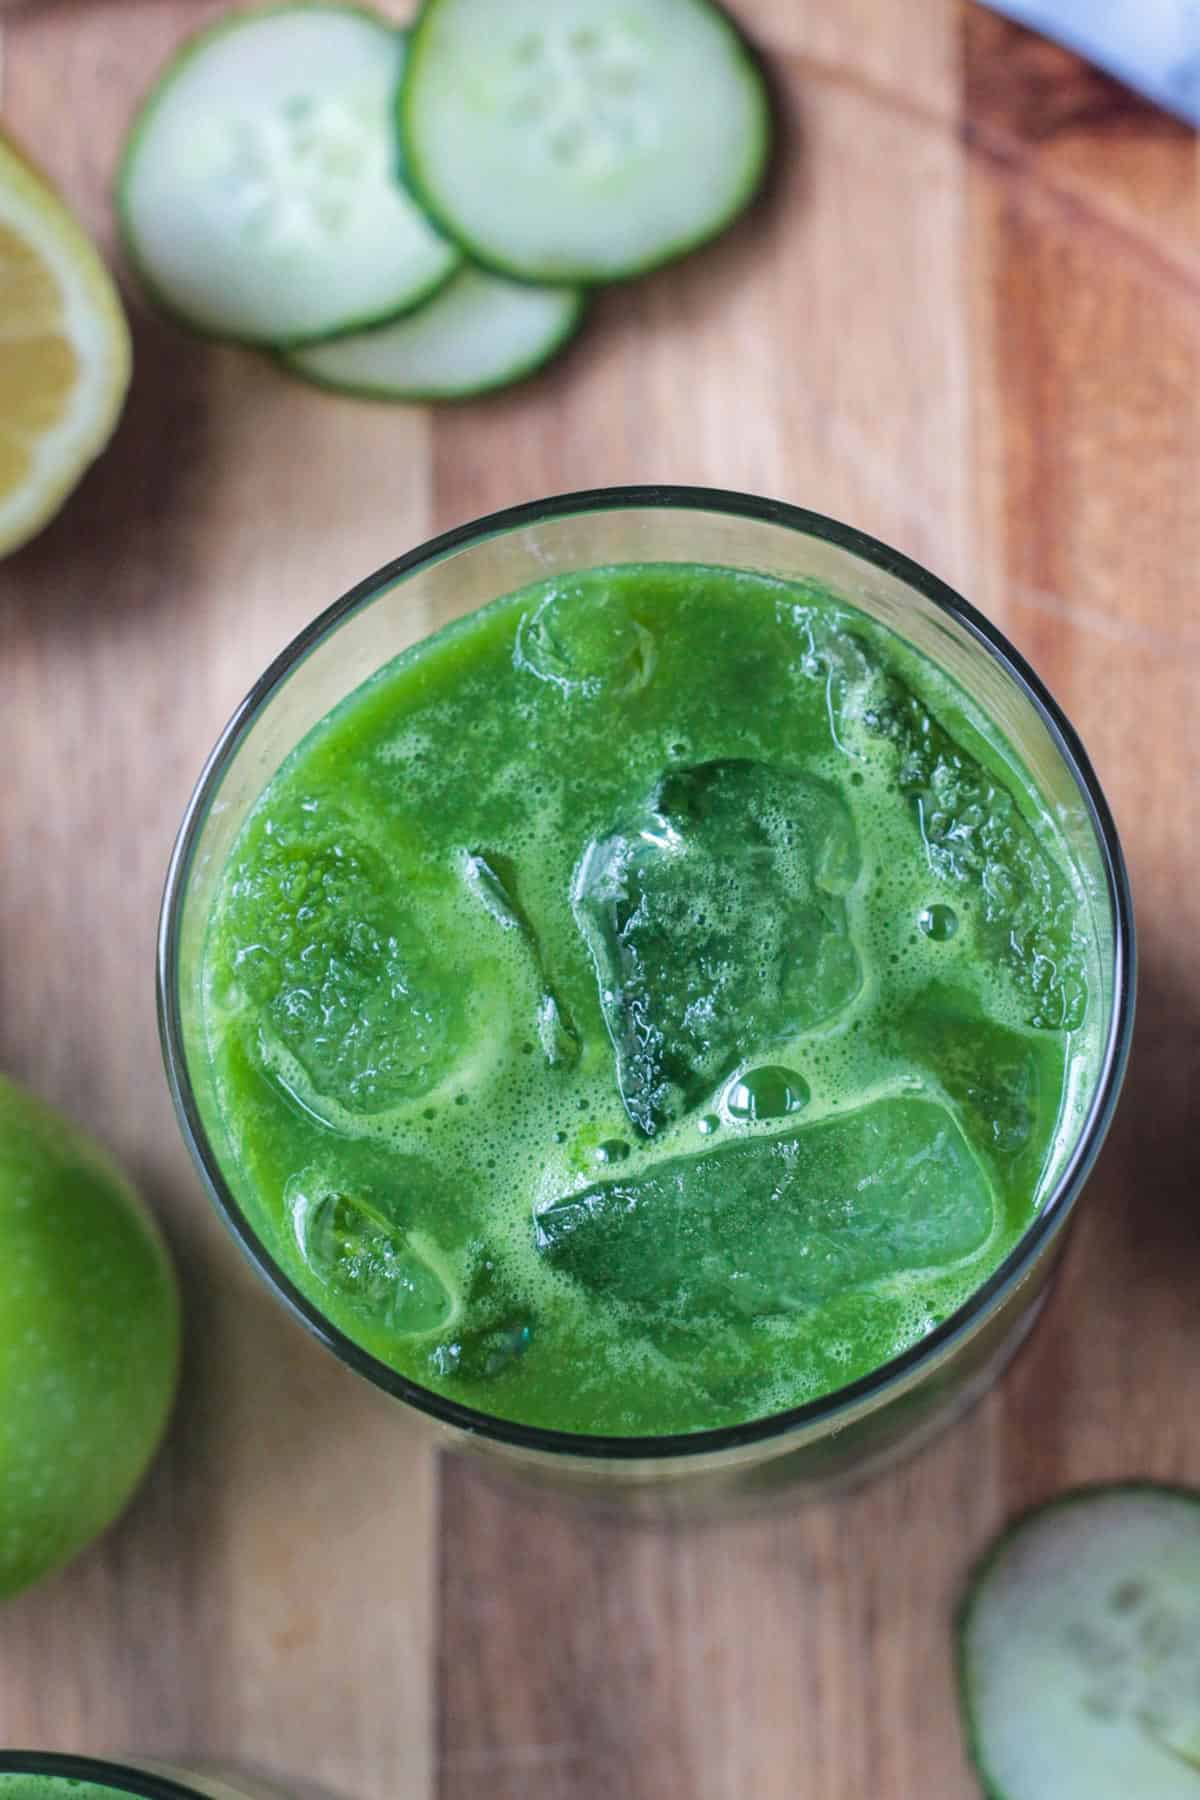 Overhead view of a glass of green blender juice with ice.